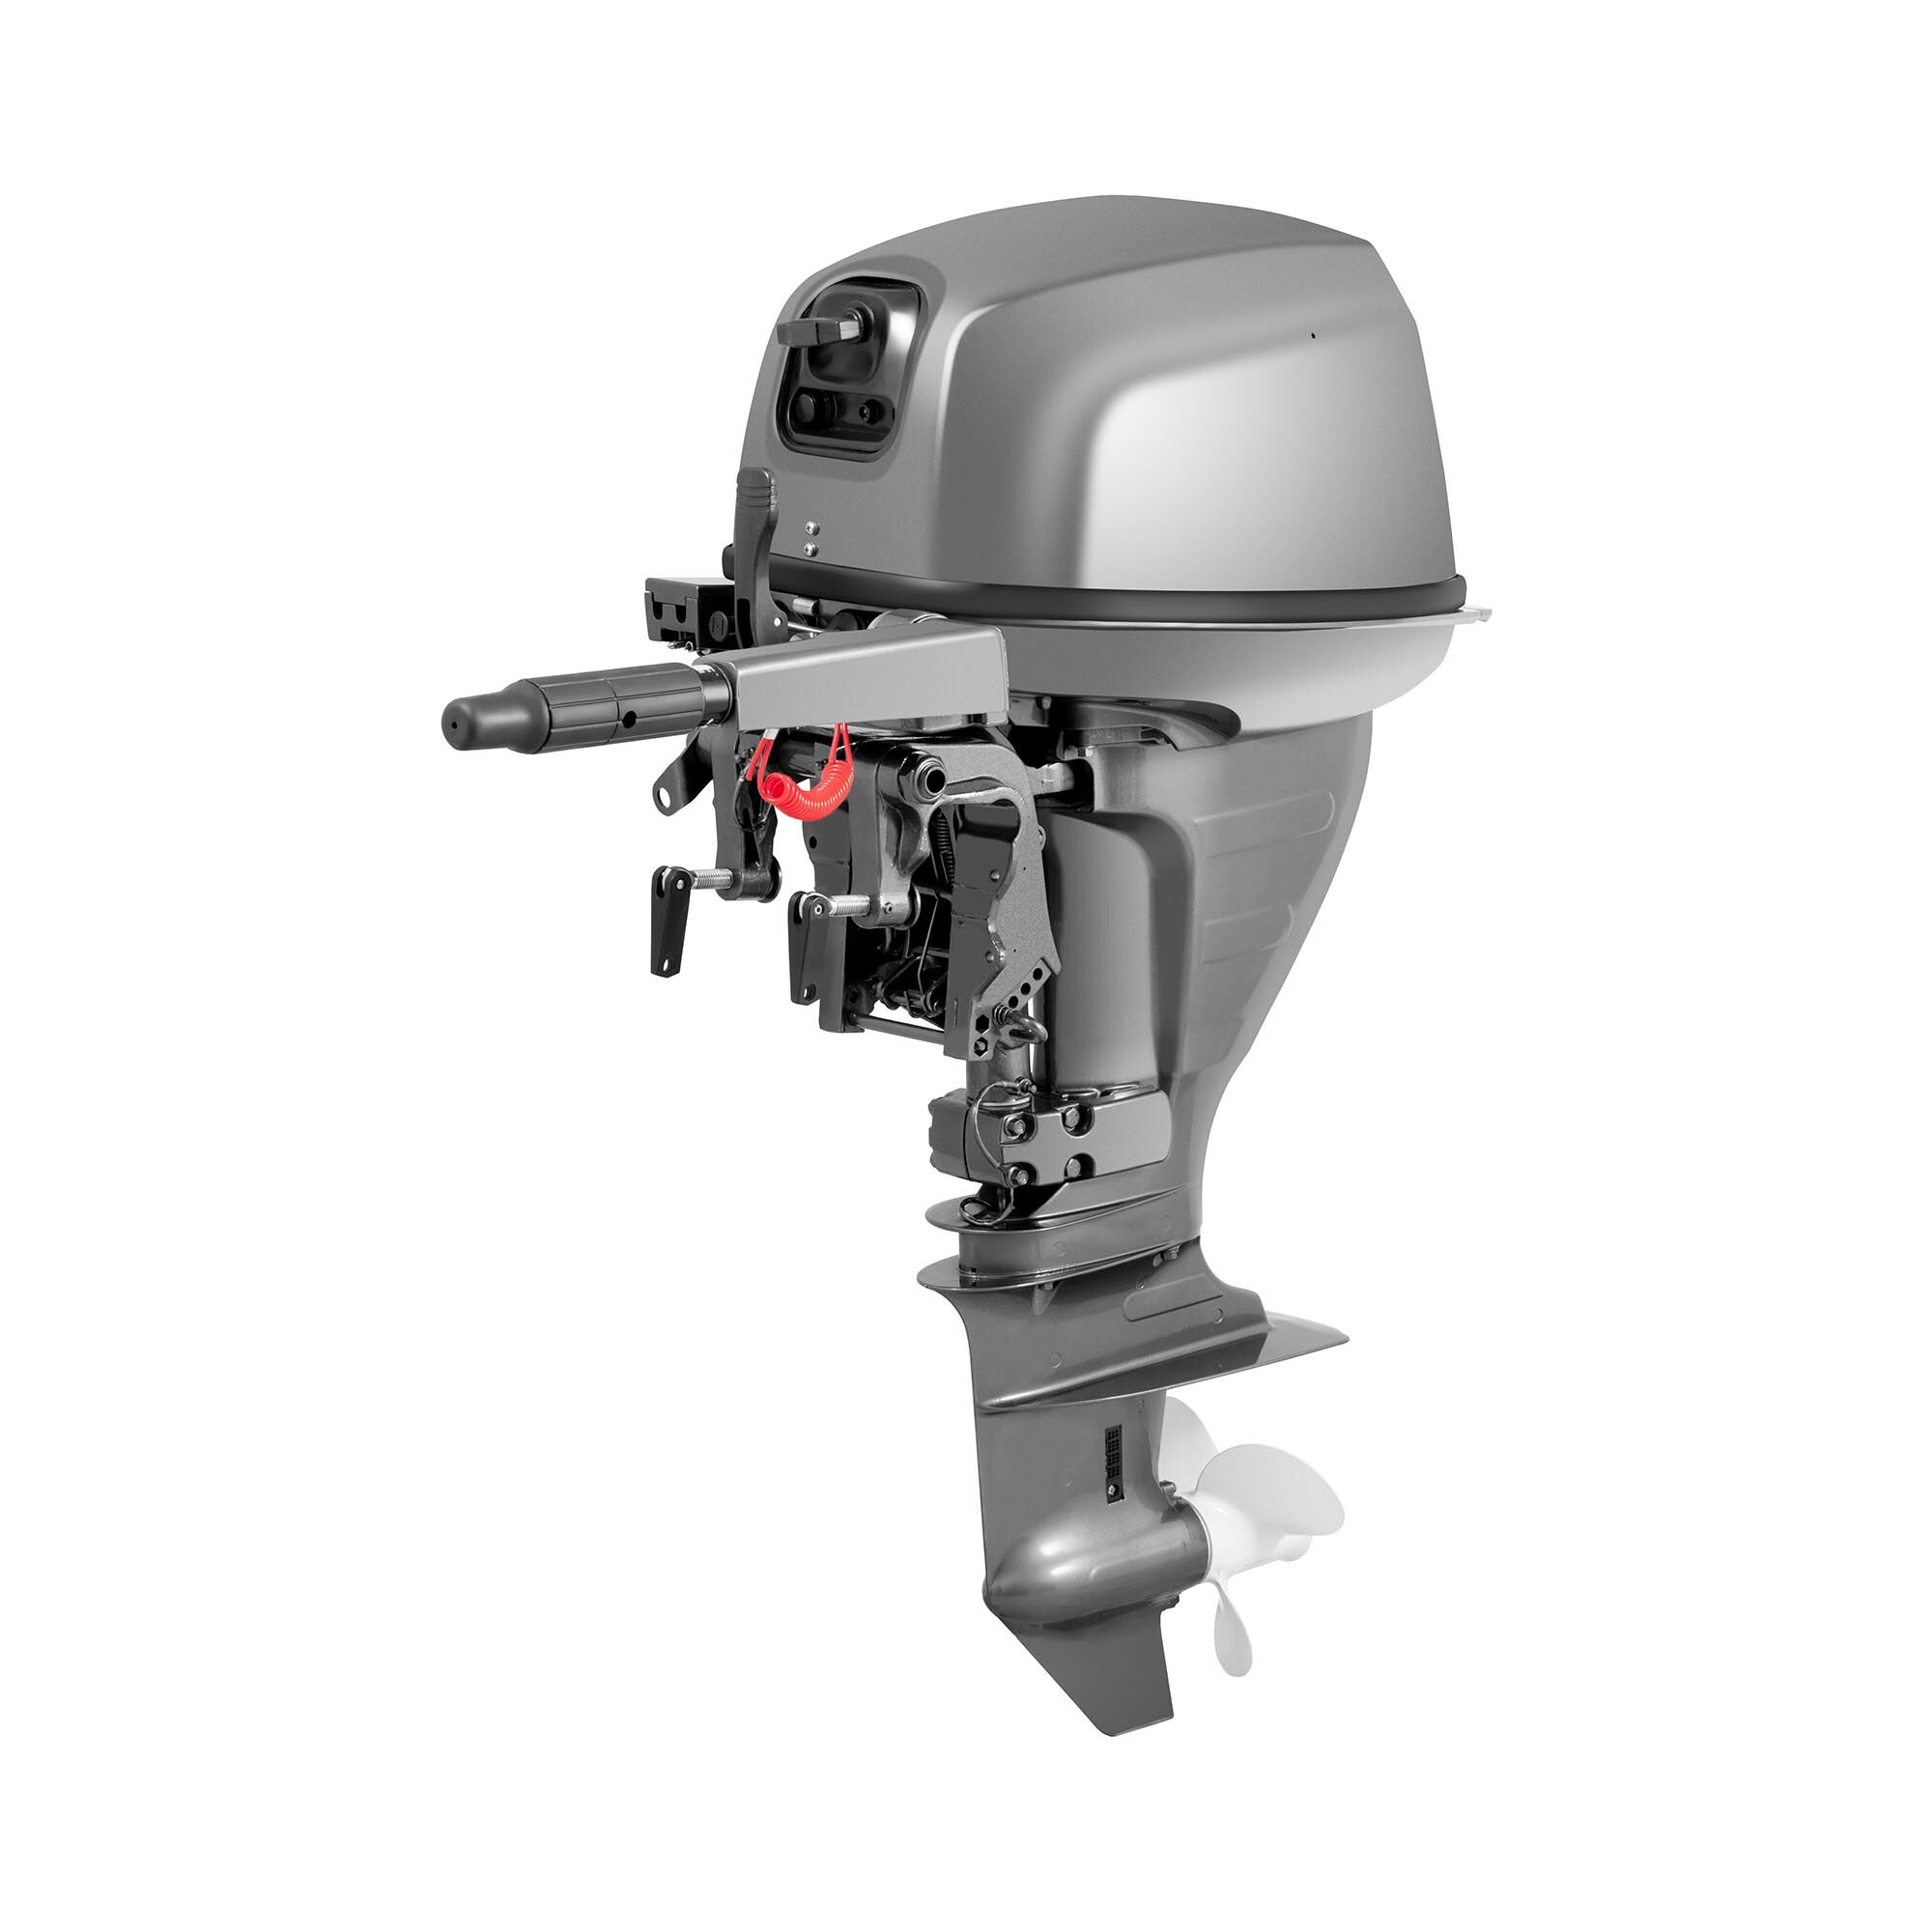 MSW Outboard Motor - 15 hp